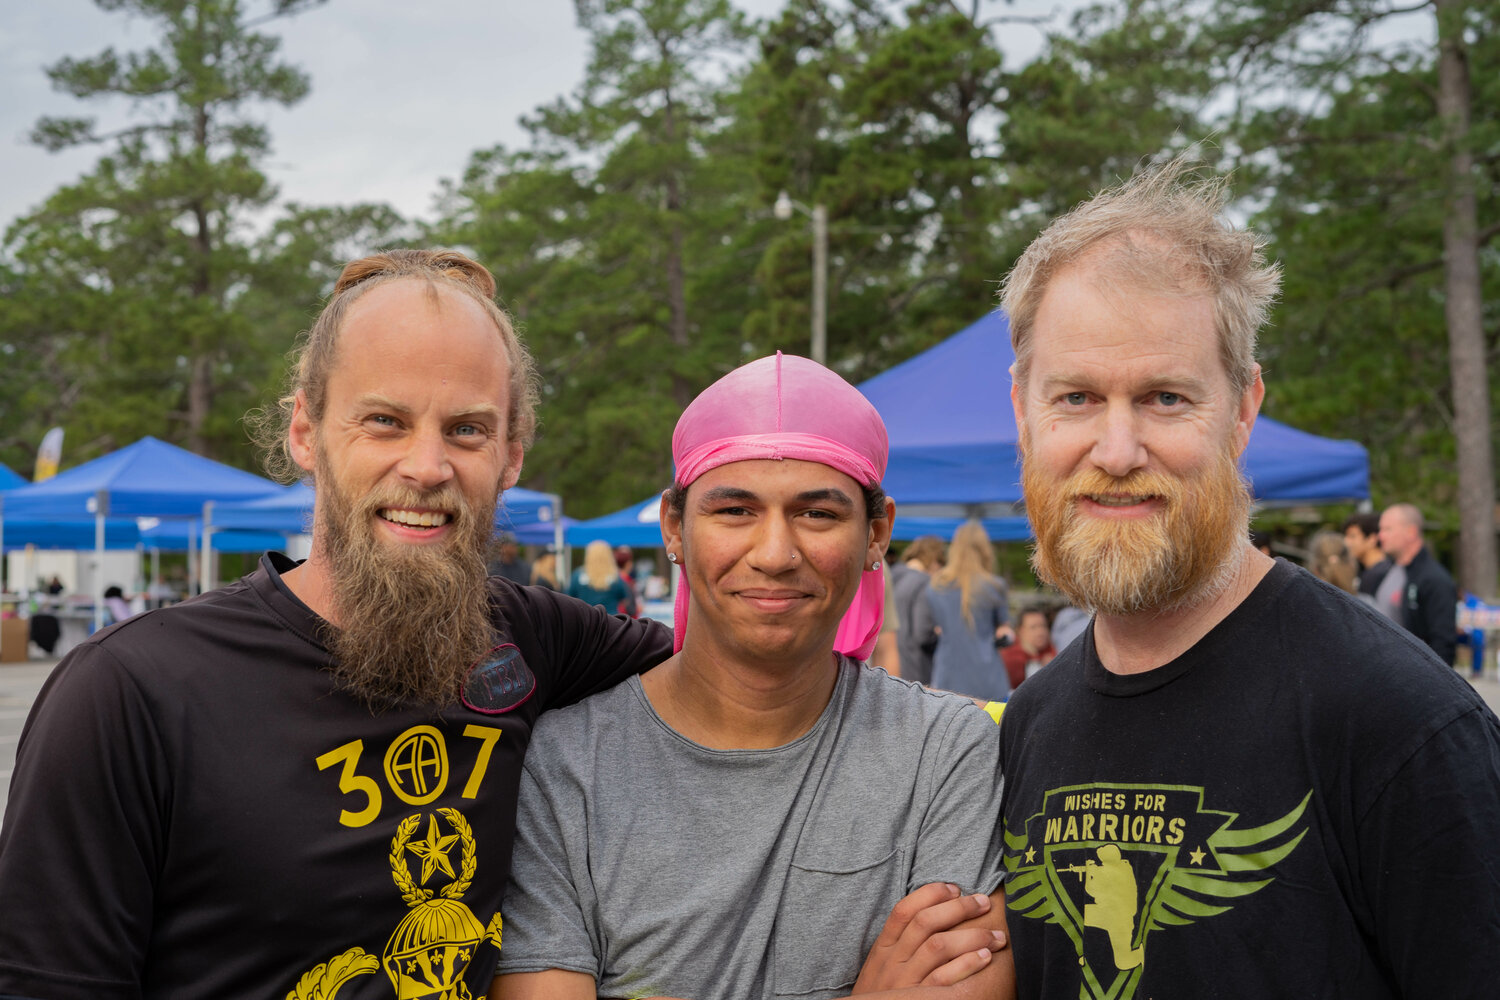 Retired Staff Sgt. John Bender, Ji’sean Weber and retired Staff Sgt. Anthony Jobes participate in Fort Bragg's Mud Run on April 22 at McKellar's Lodge.